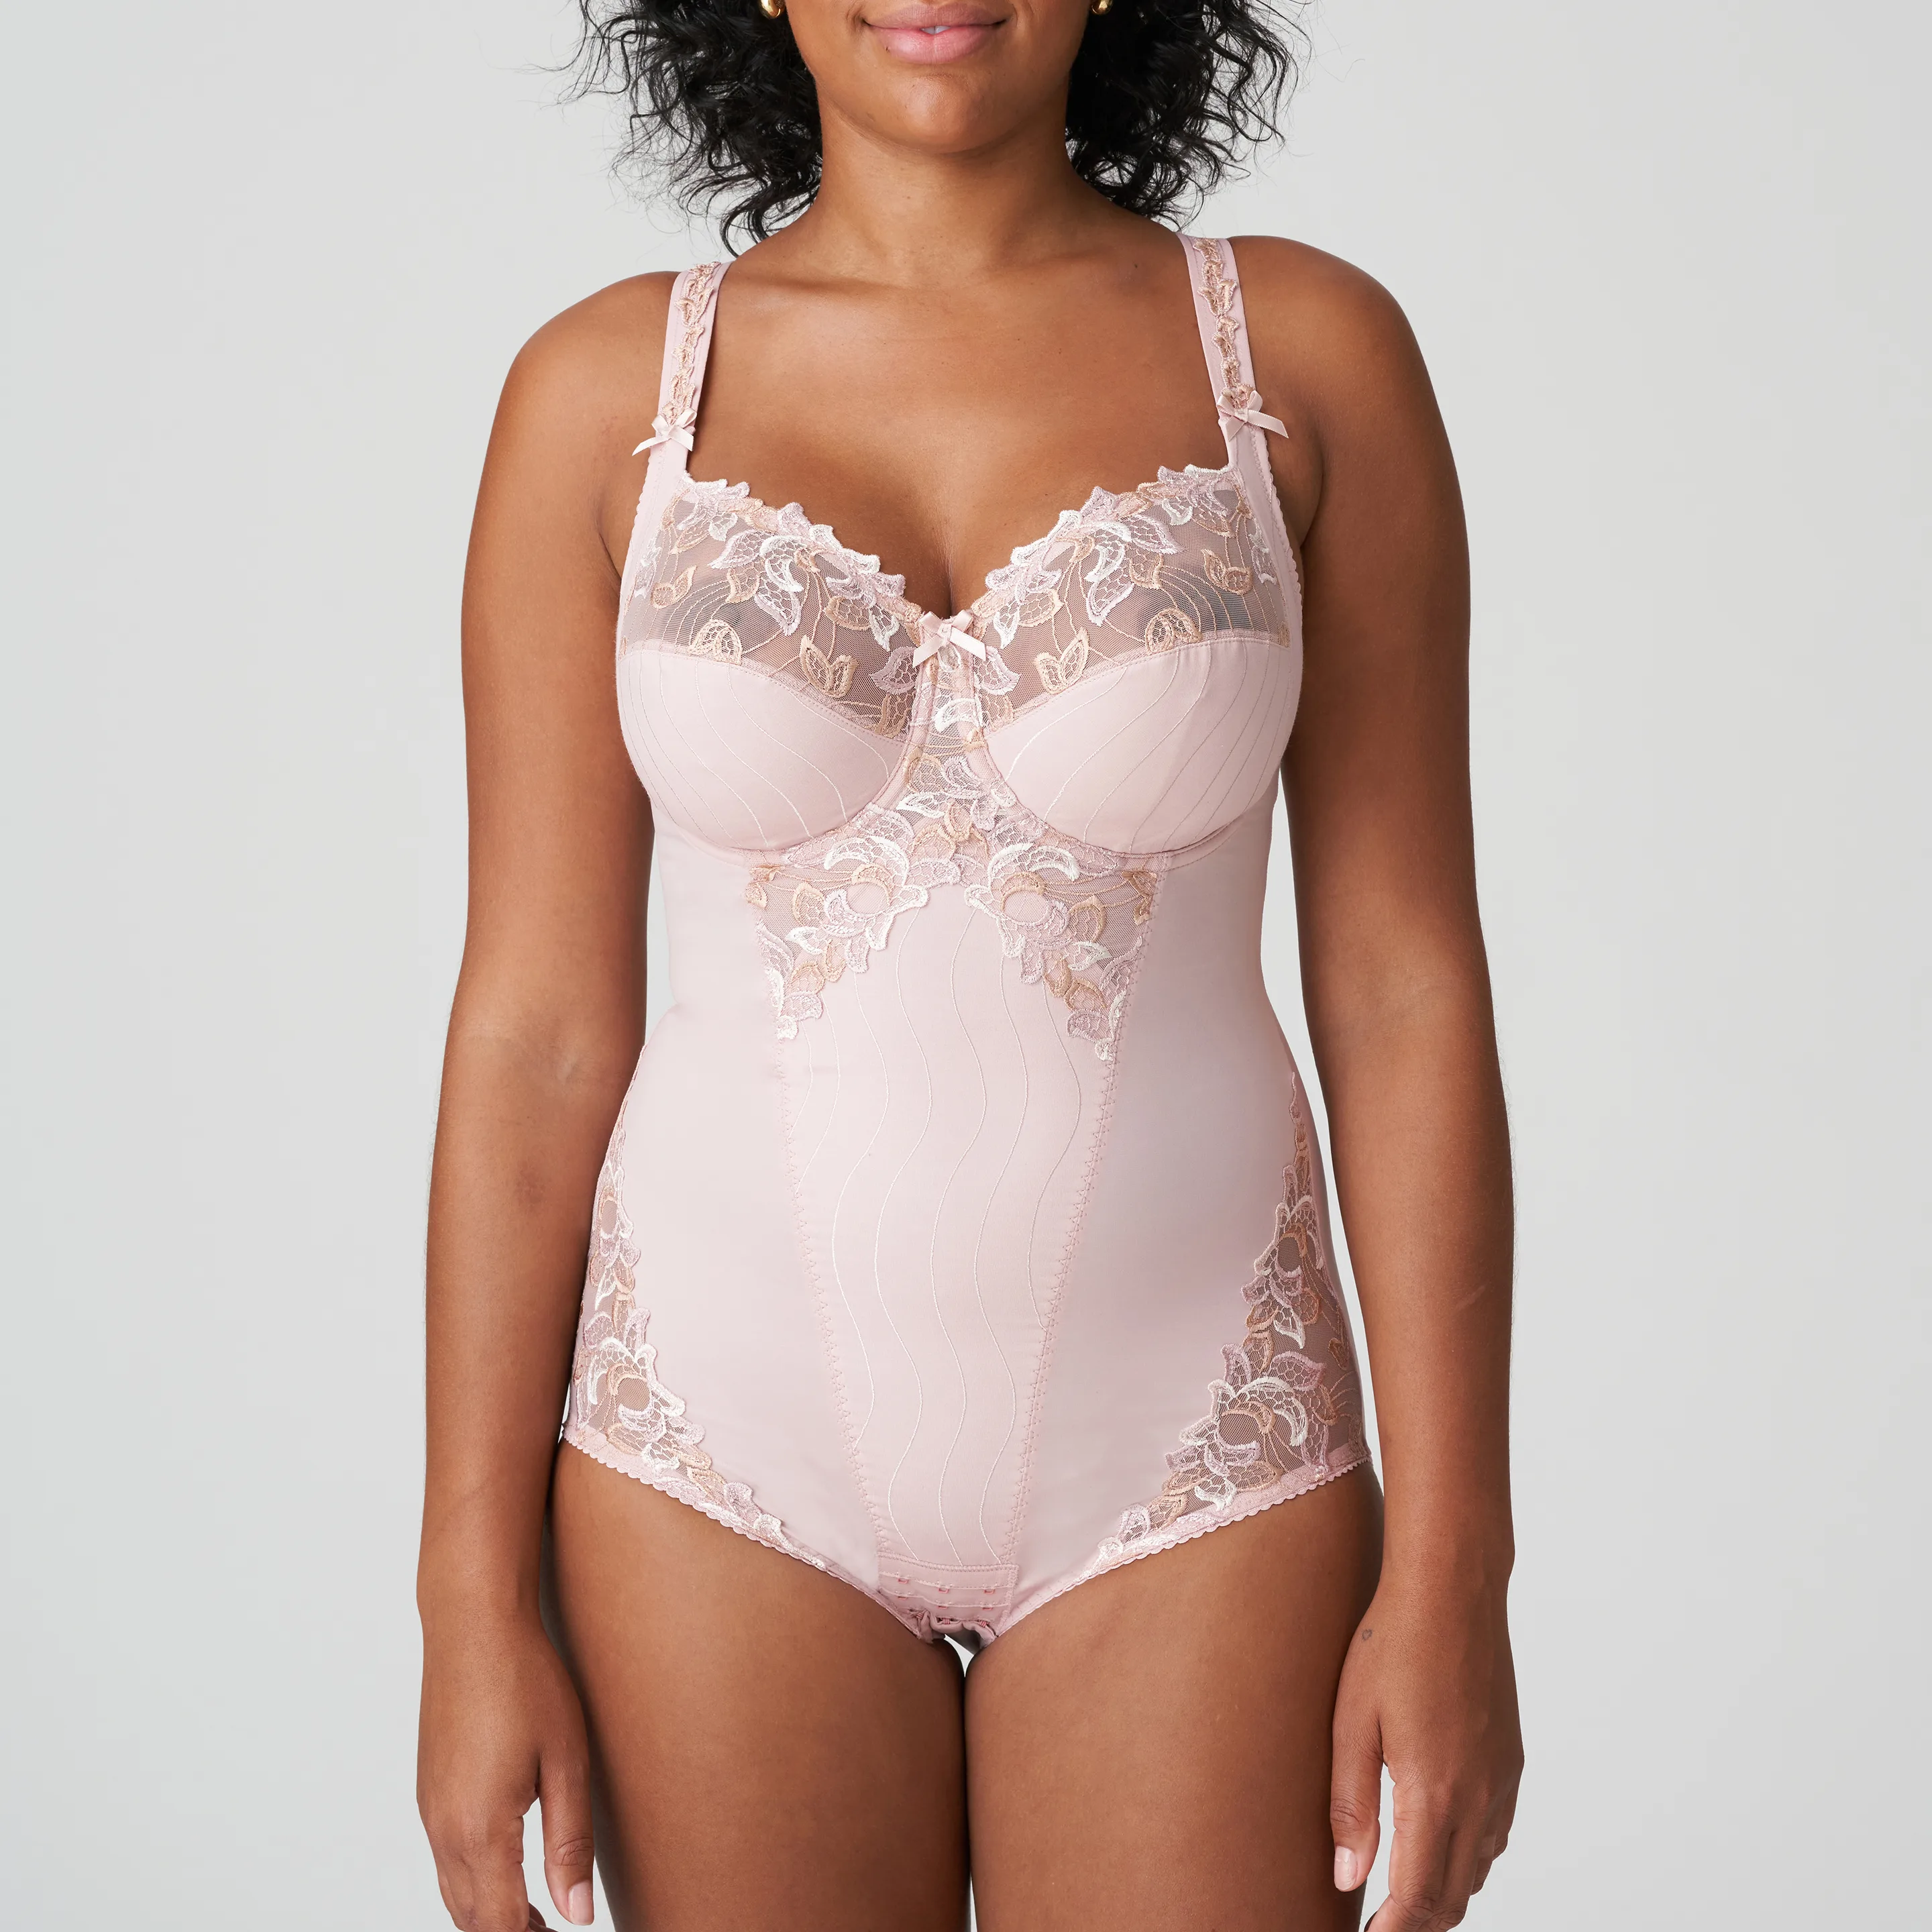 Vicanie's The Bra Fitting Specialists - If you thought the bodysuit from  this Prima Donna group was stunning, your eyes won't believe this bra.  Delicate lace swirls around a supportive cup. The